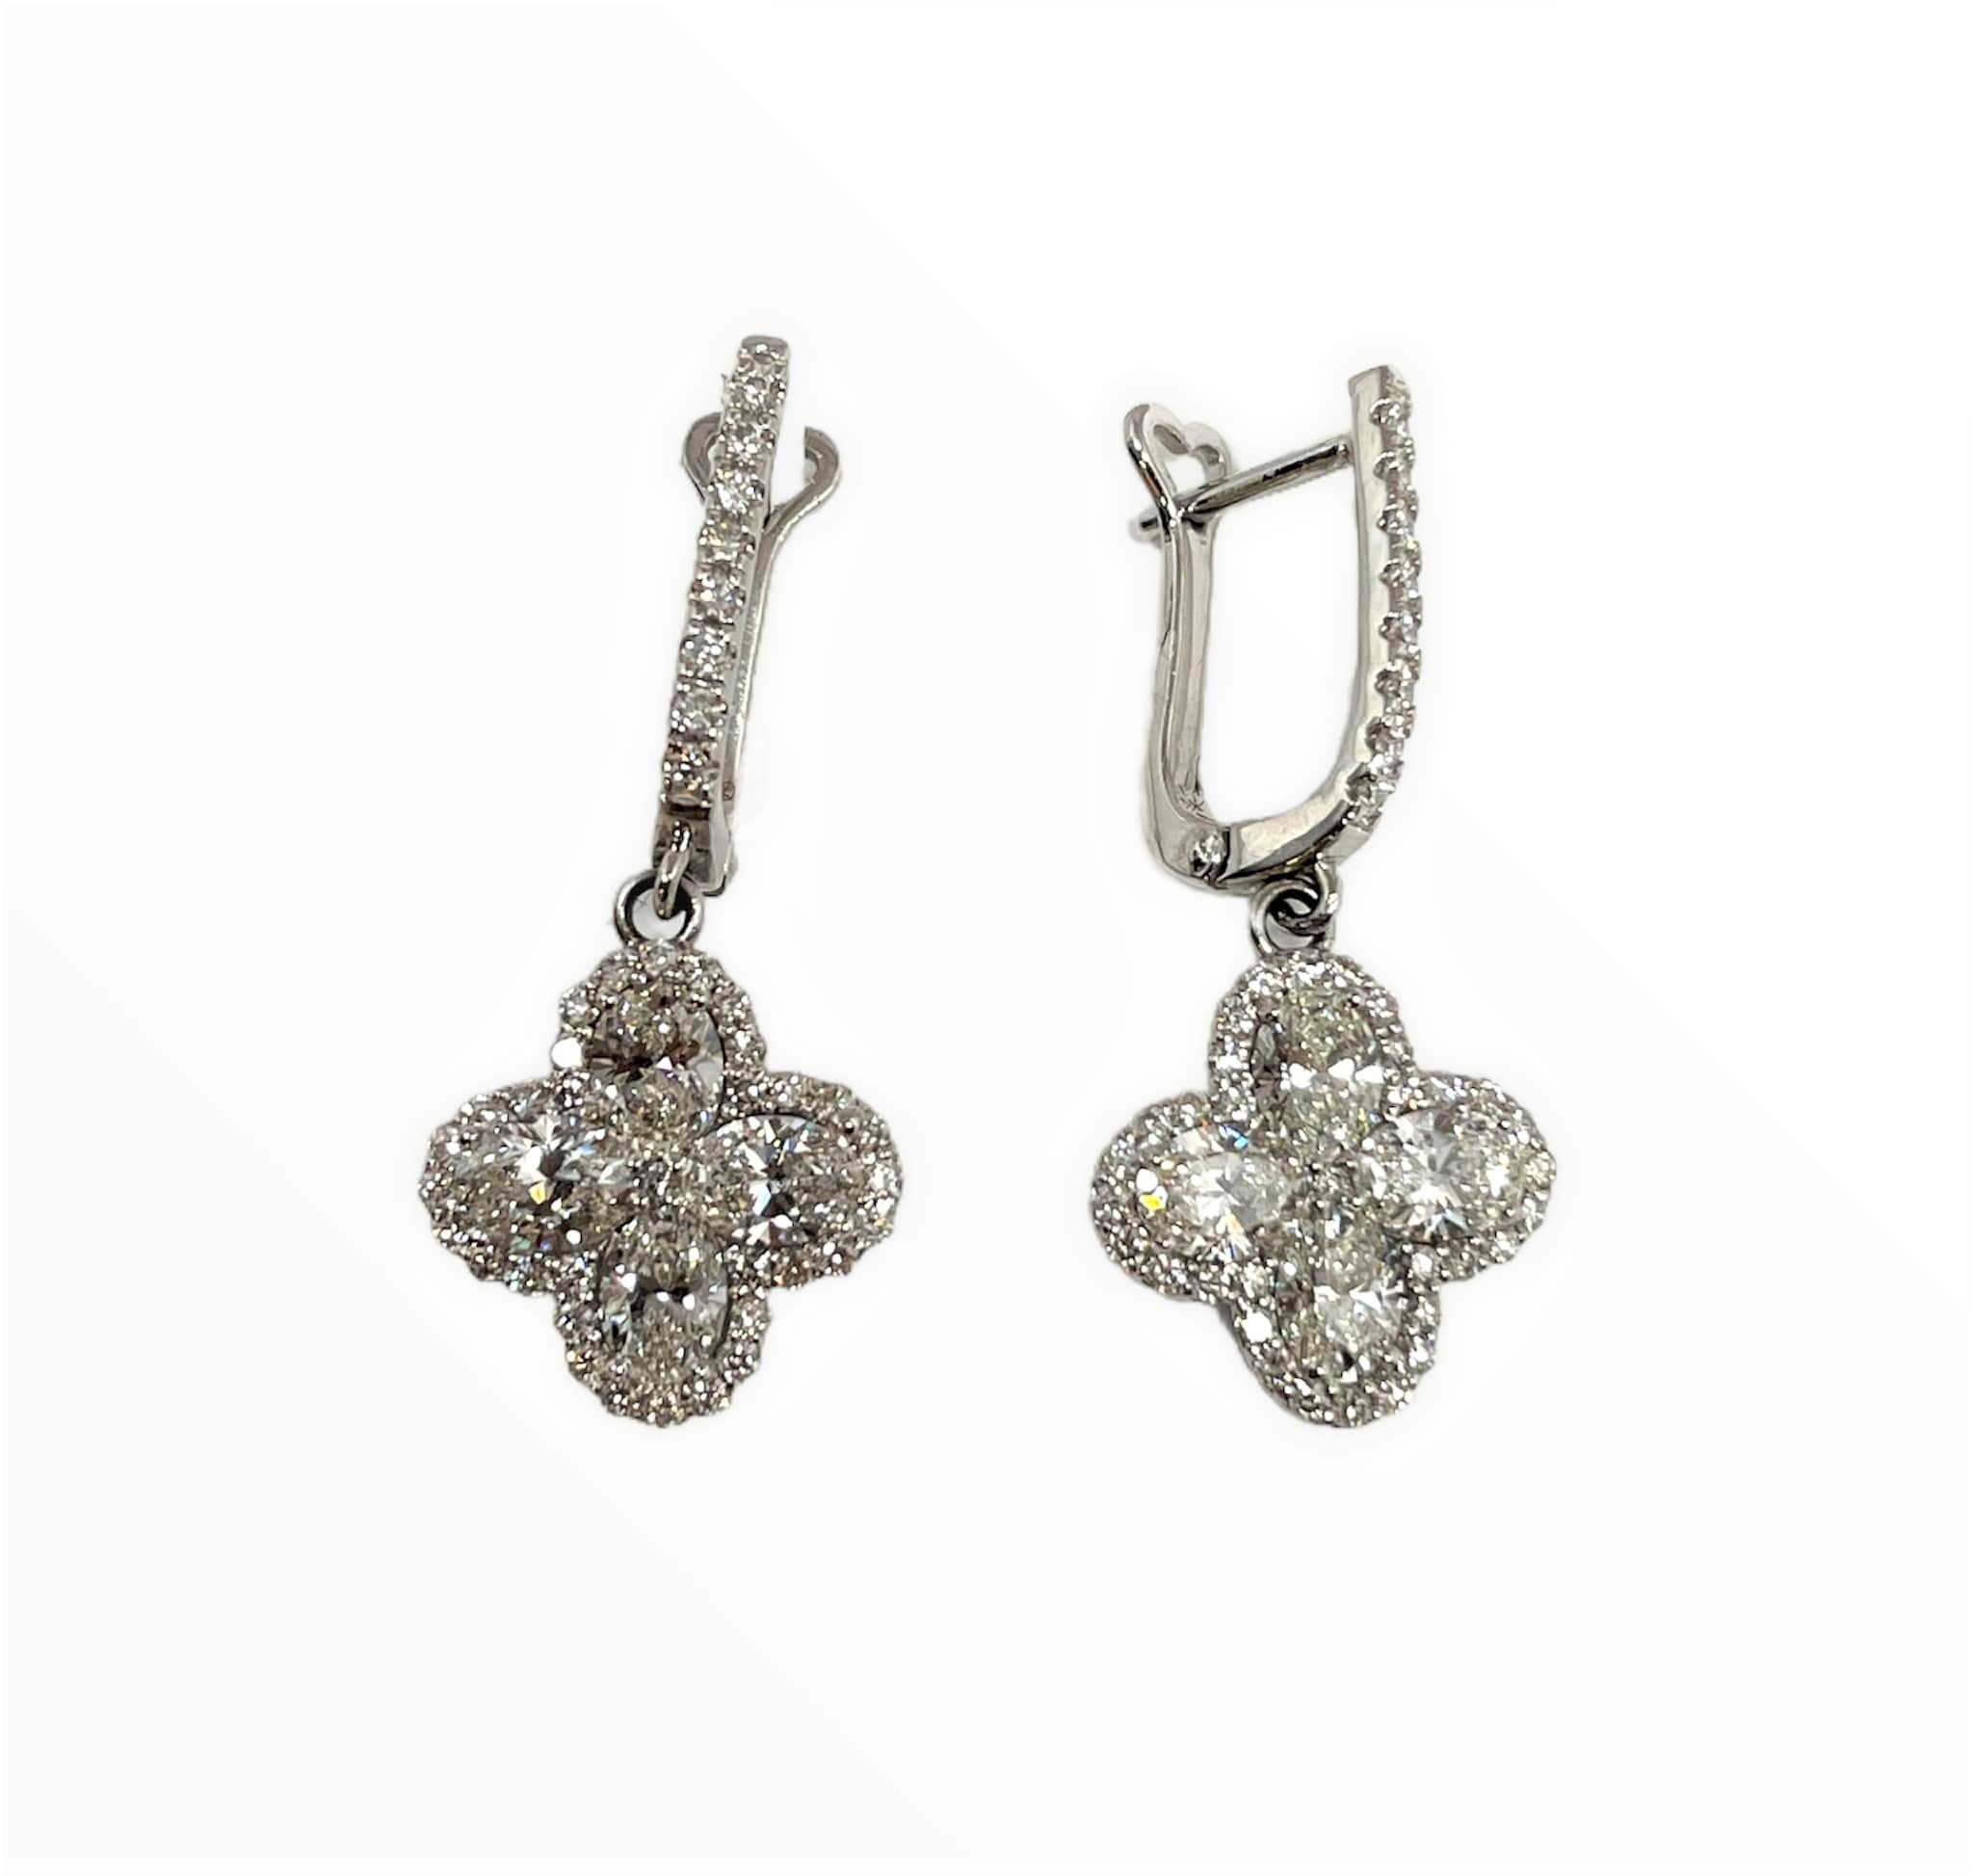 These gorgeous diamond earrings feature 8 oval shape diamonds weighing 1.92 ct graded E-F, VS1-VS2 surrounded by 80 diamonds weighing .68 ct set in 18k white gold